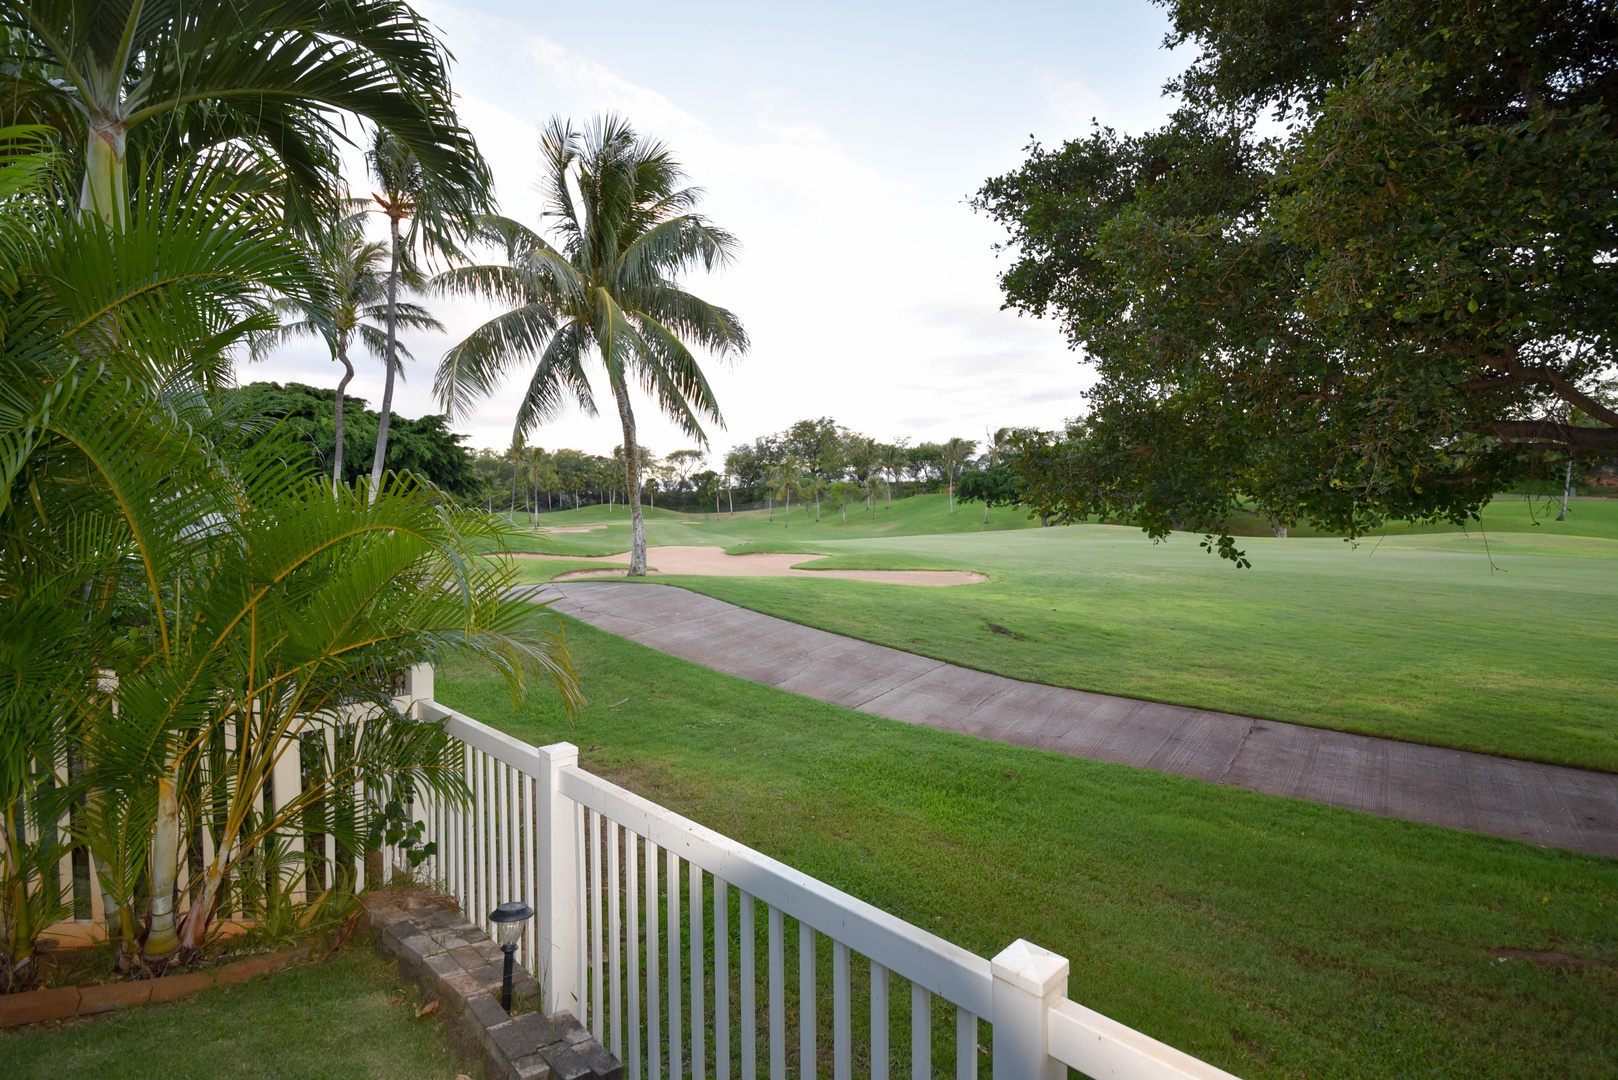 Kapolei Vacation Rentals, Fairways at Ko Olina 8G - Play the course during your getaway.